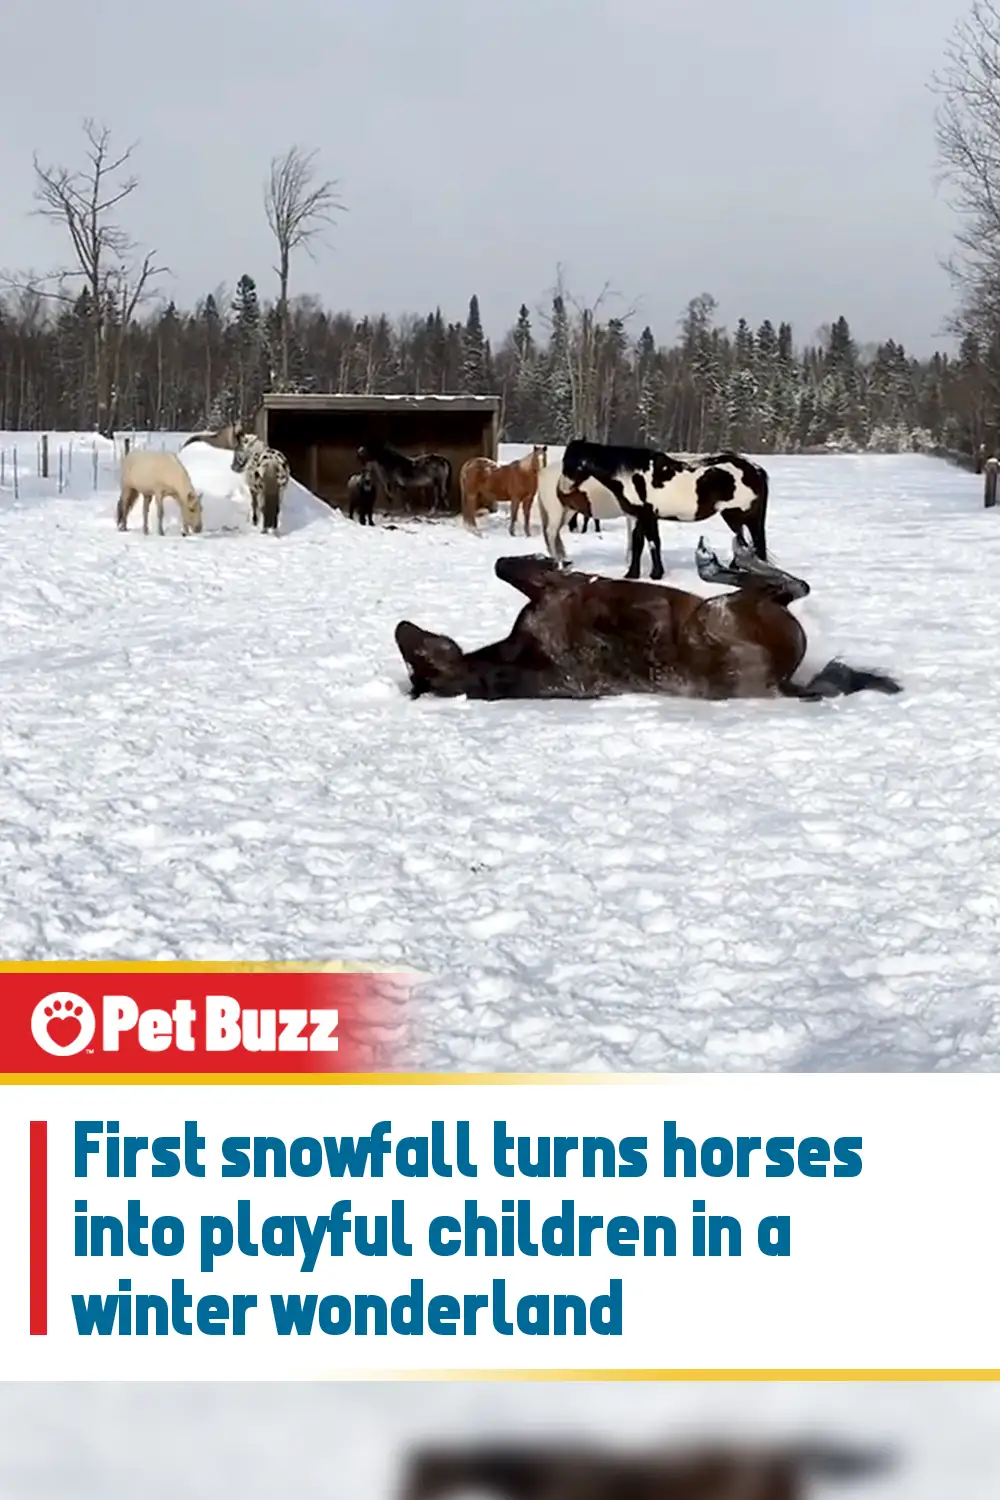 First snowfall turns horses into playful children in a winter wonderland